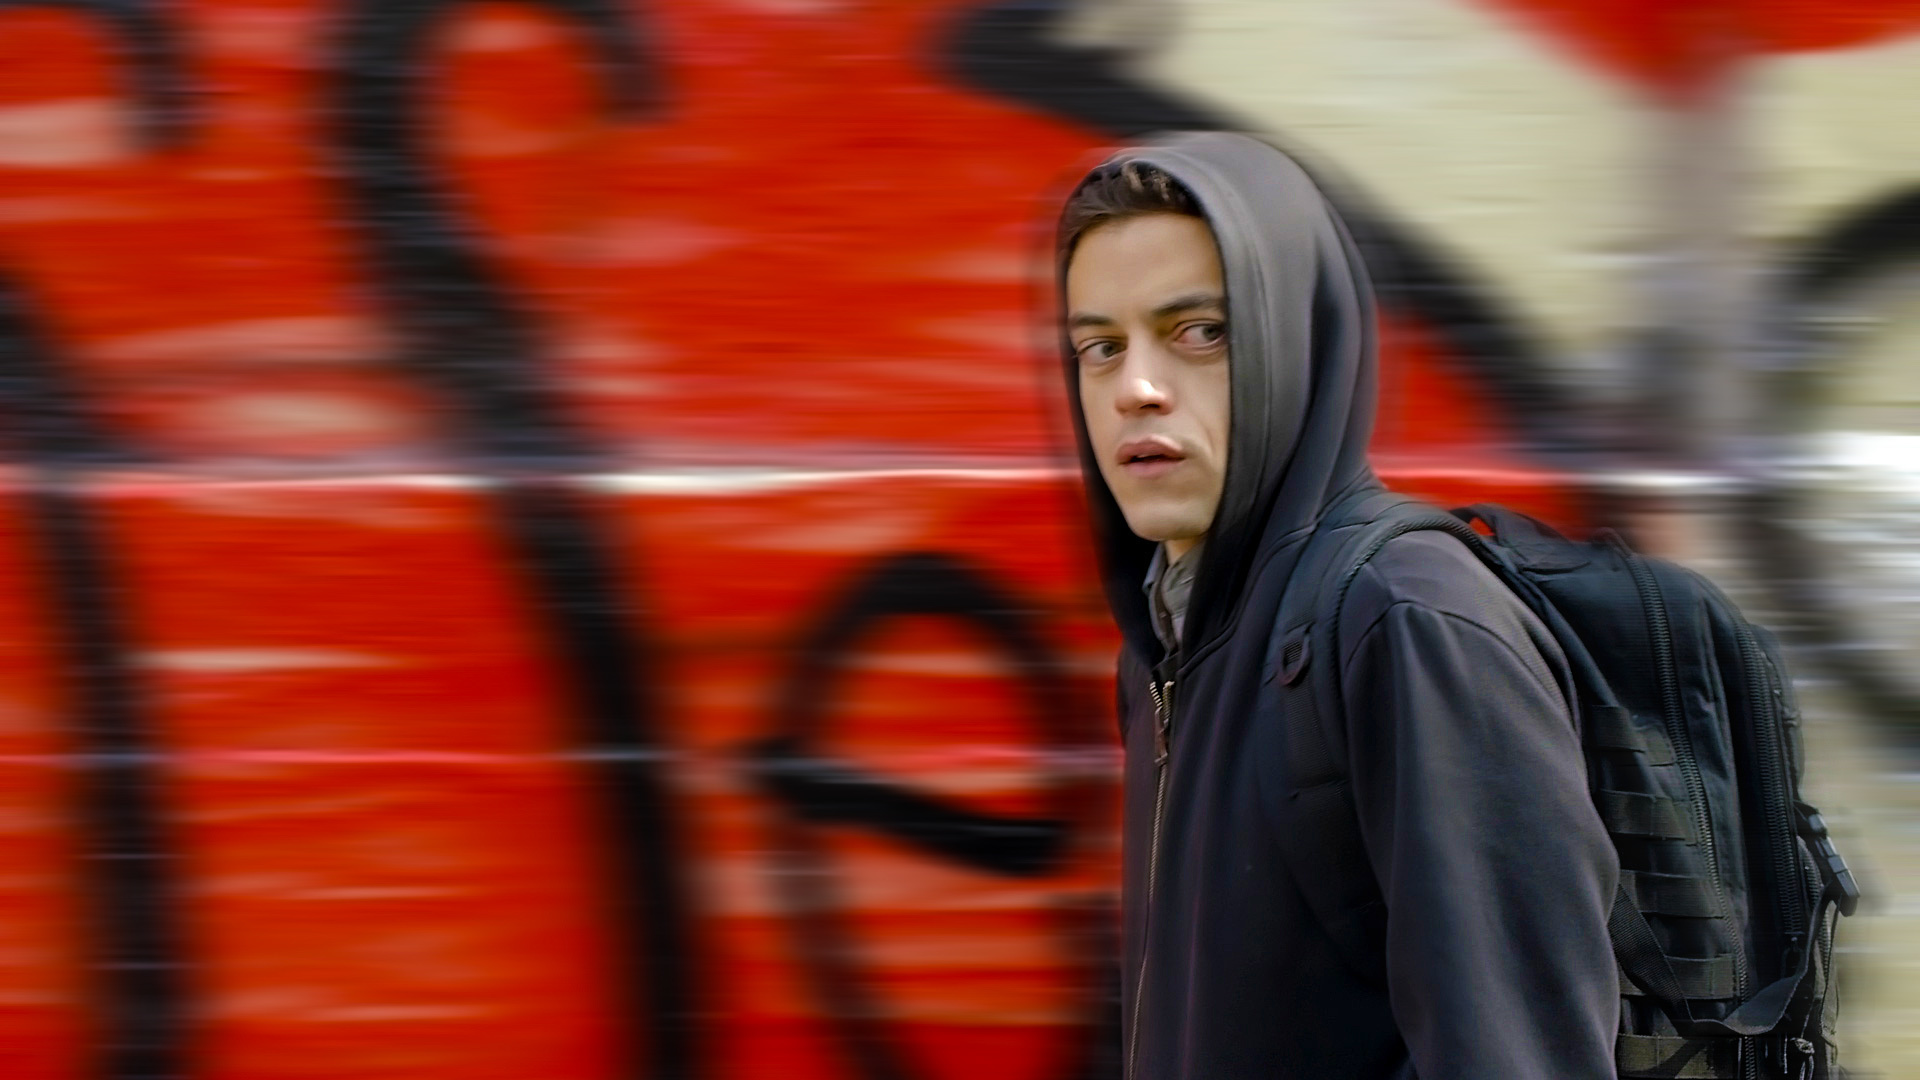 Mr Robot wallpapers for desktop, download free Mr Robot pictures and  backgrounds for PC